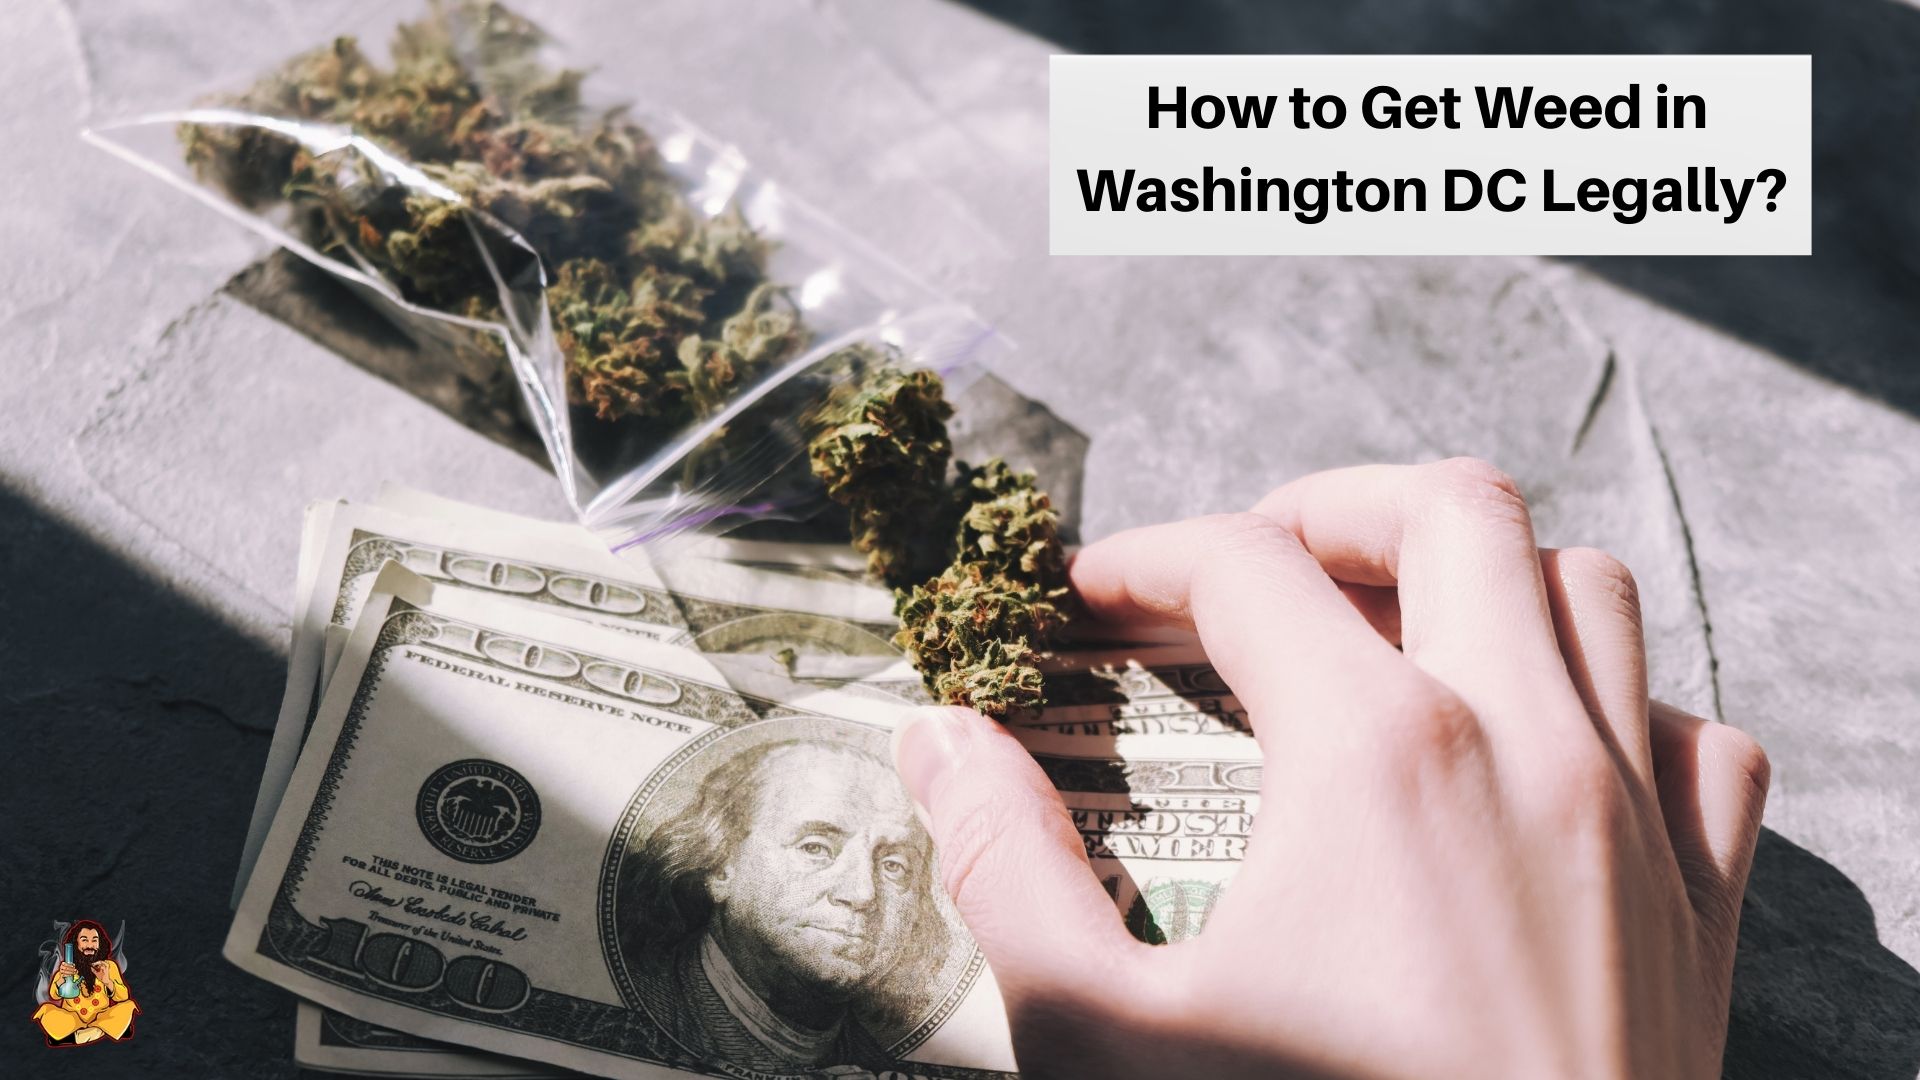 Get Weed in Washington DC Legally